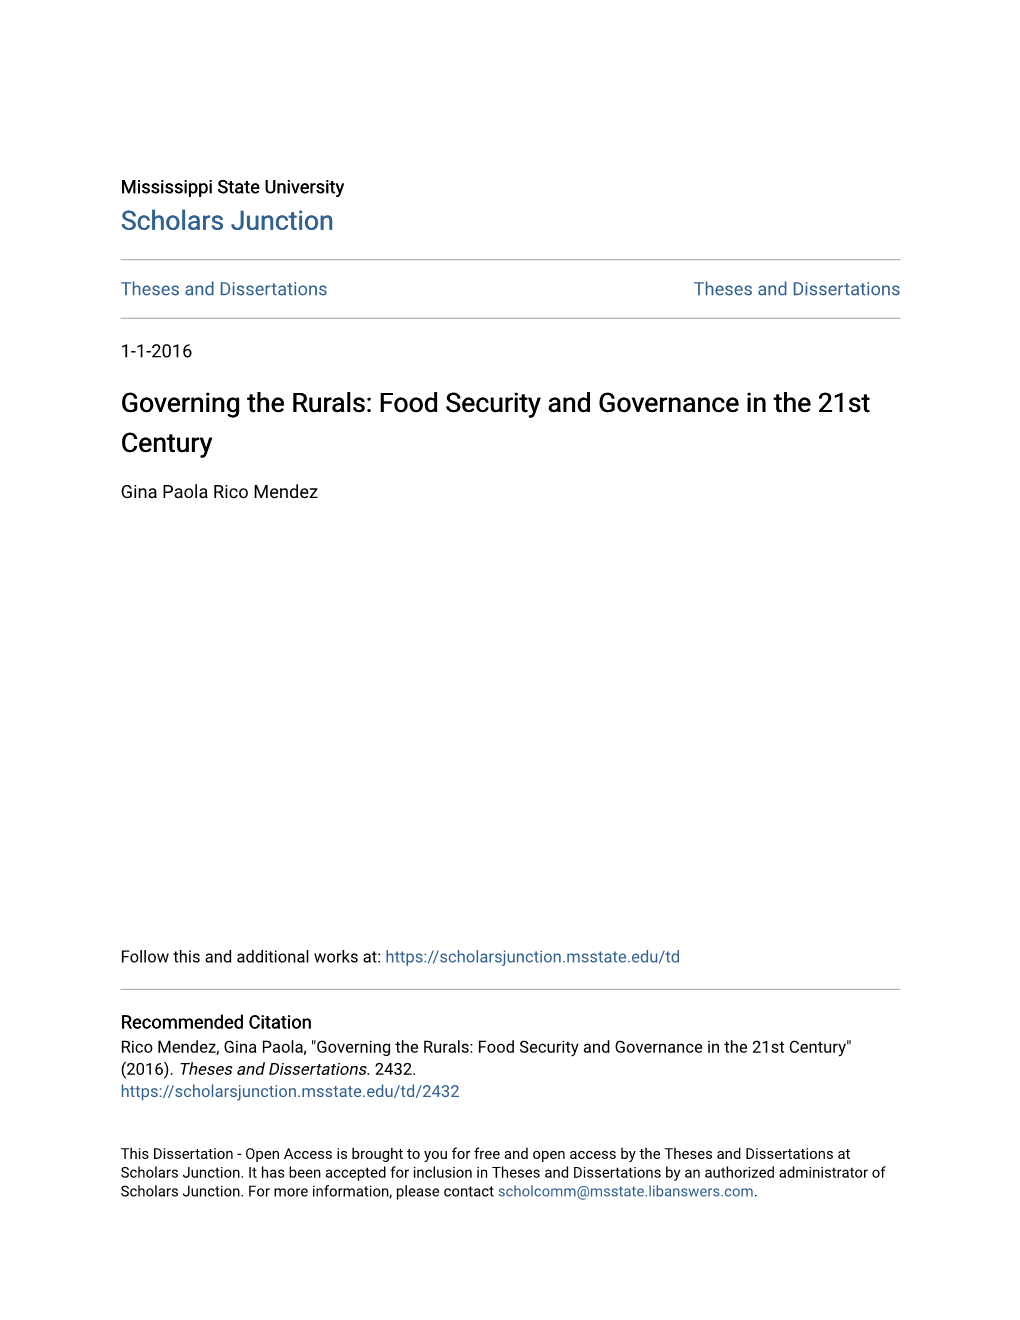 Food Security and Governance in the 21St Century